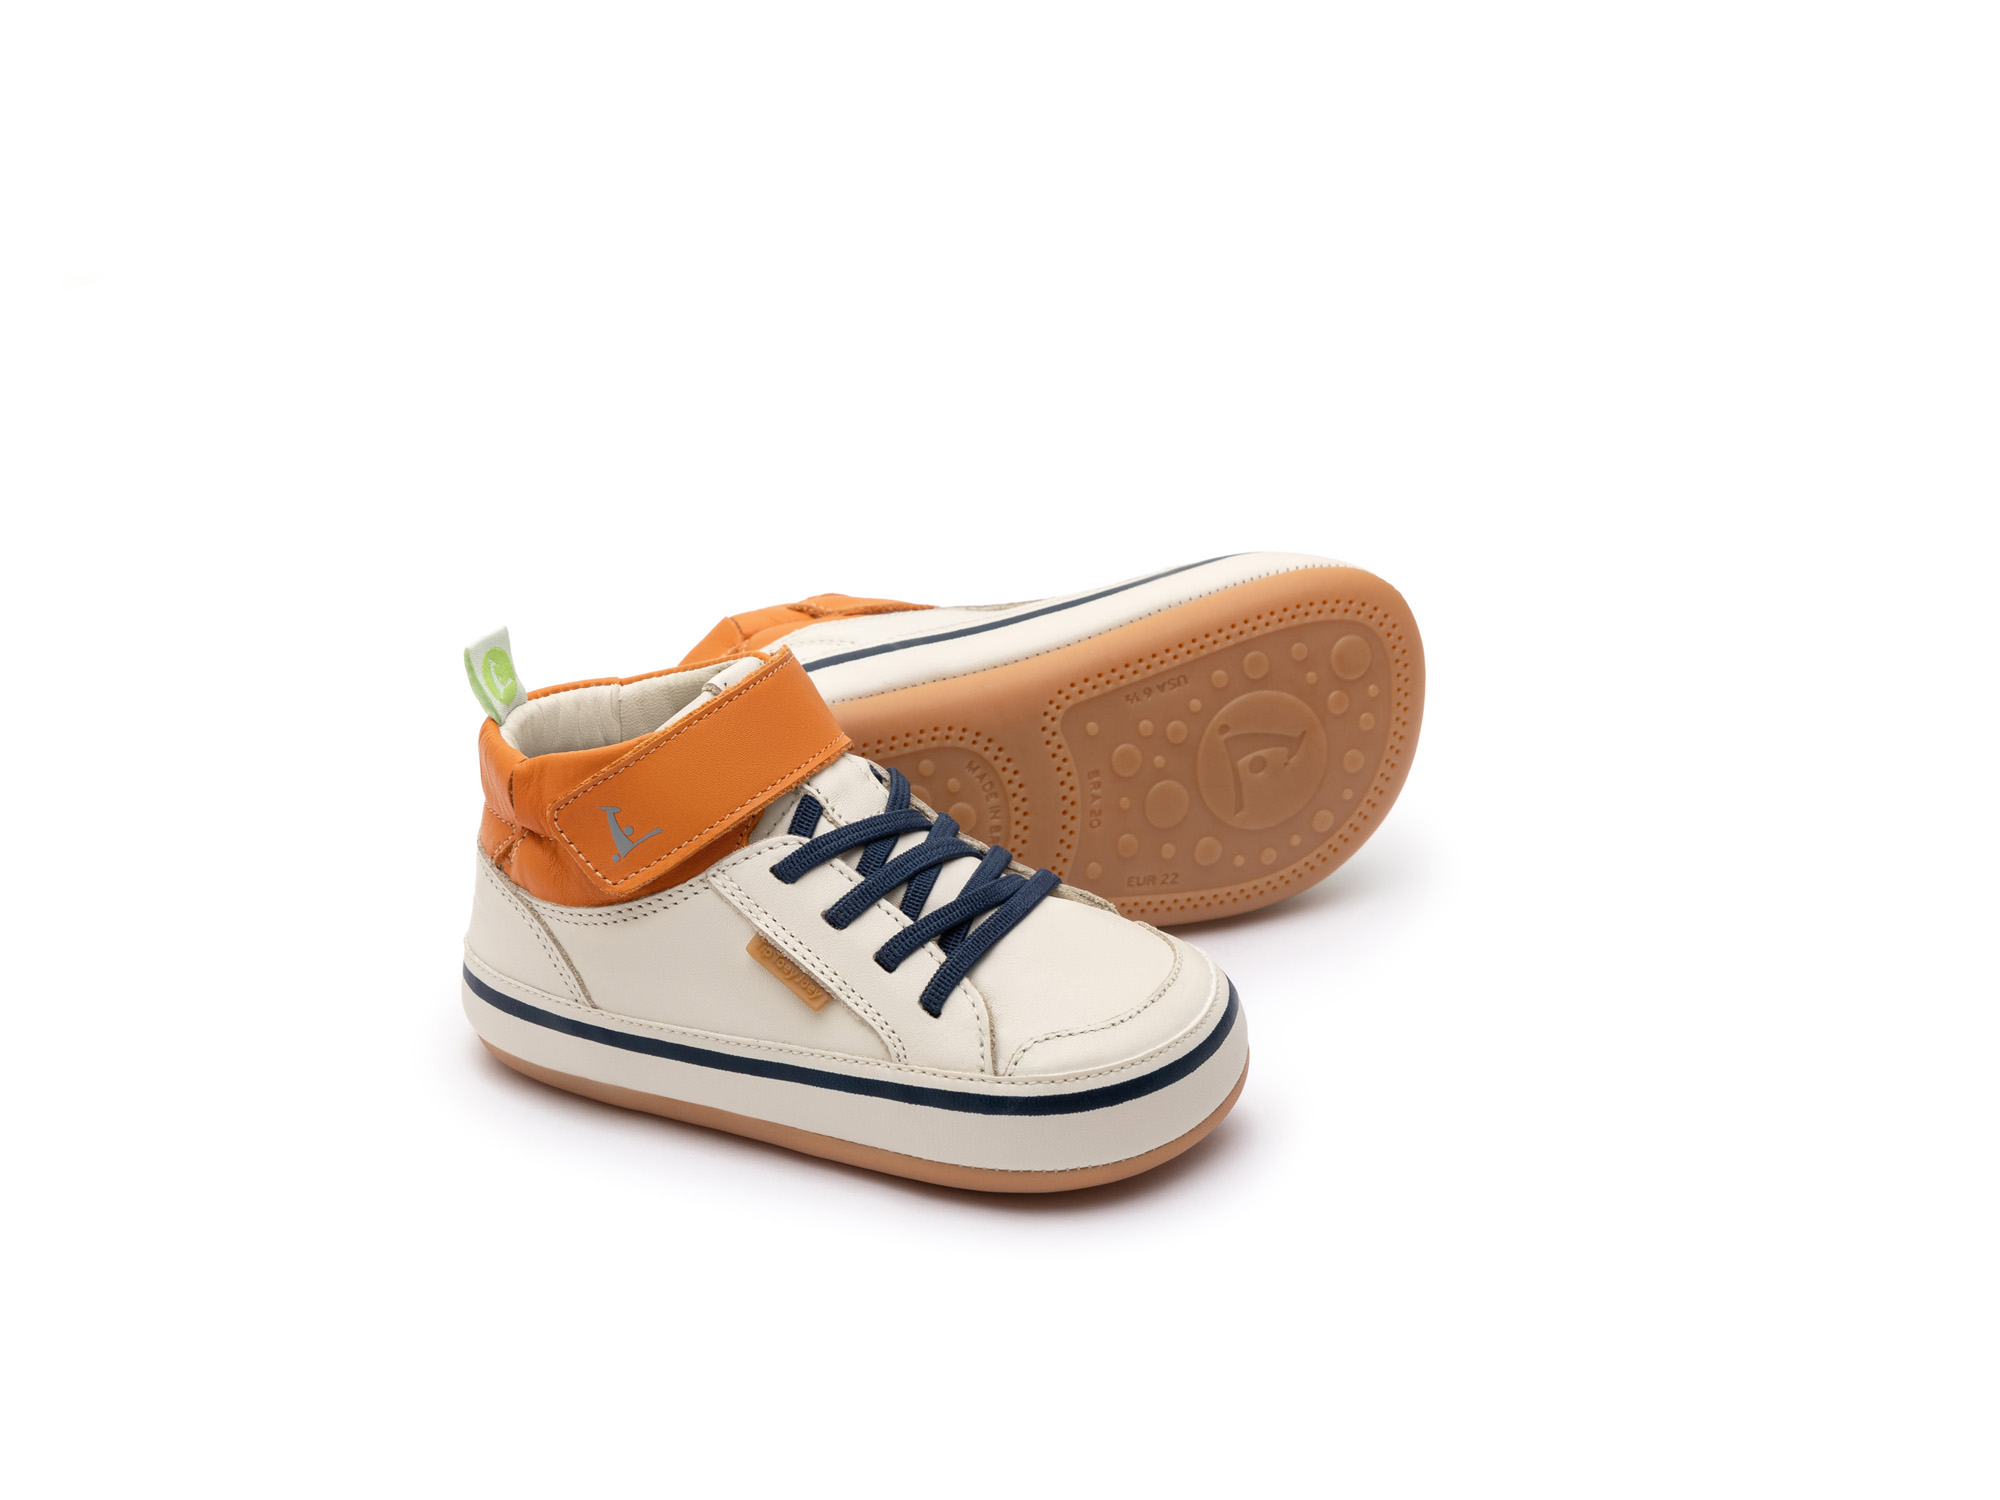 UP & GO Sneakers for Boys Alley | Tip Toey Joey - Australia - 0